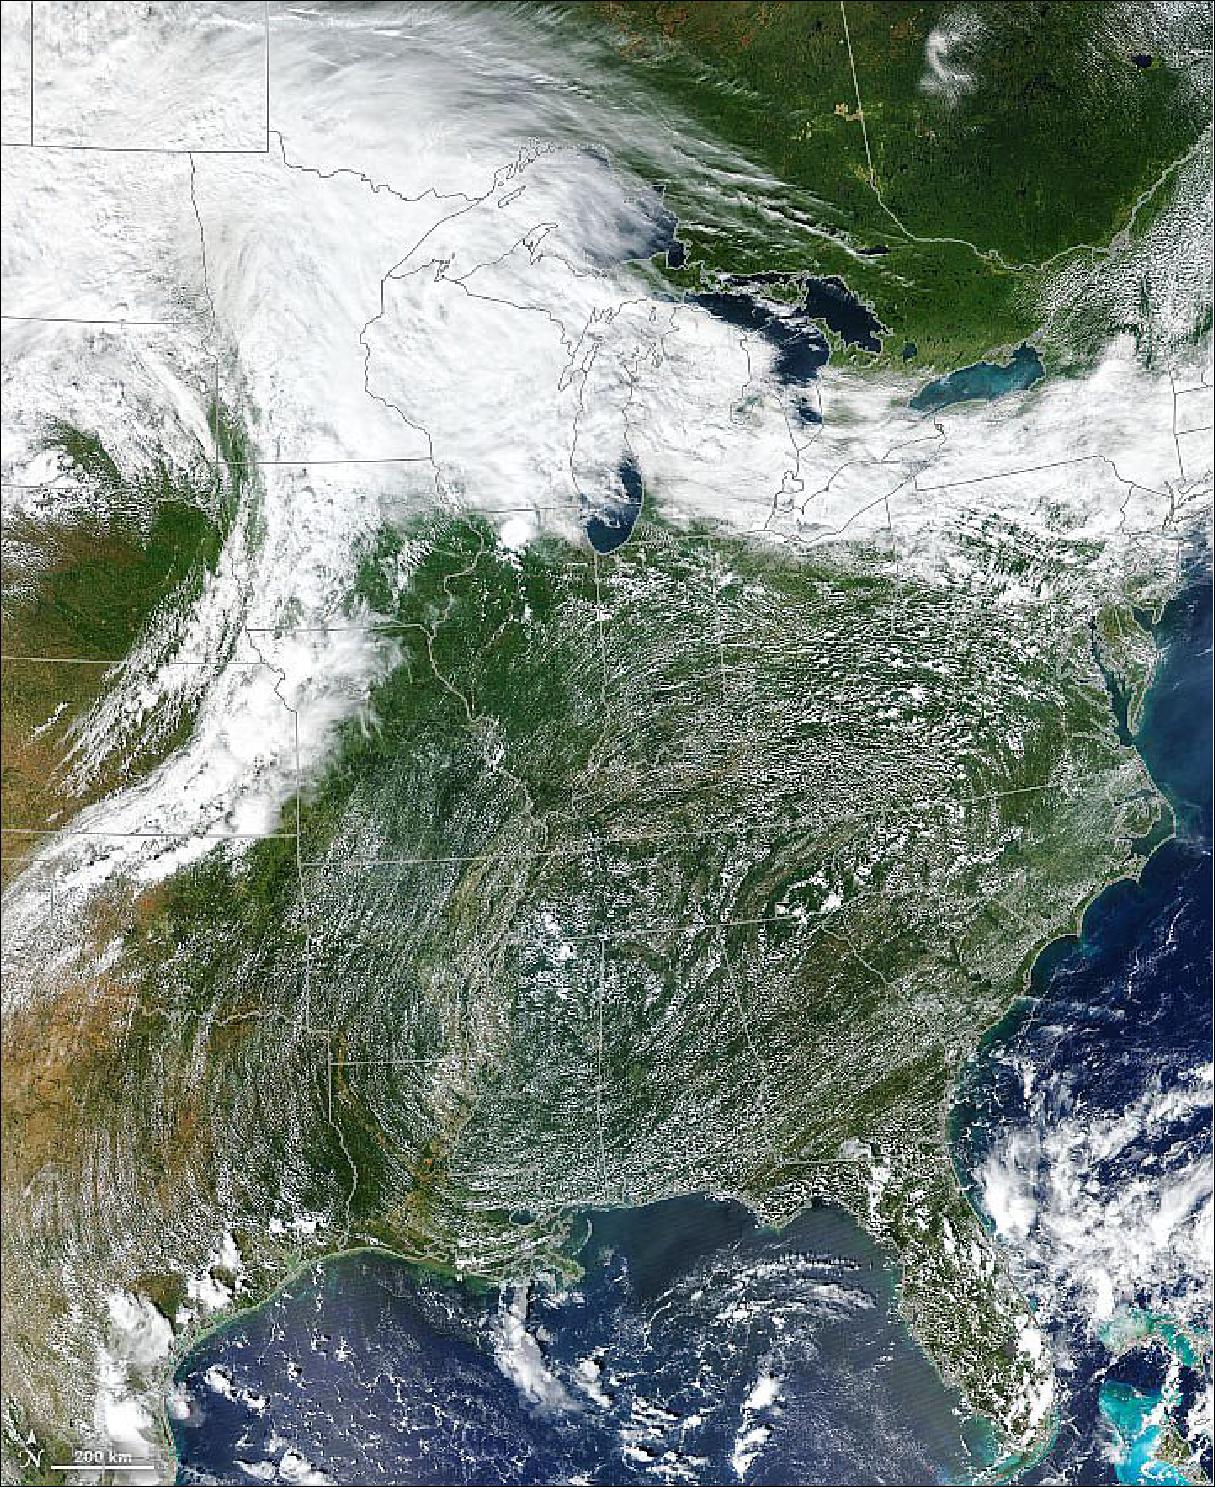 Figure 89: This image is a mosaic based on data collected by the Moderate Resolution Imaging Spectroradiometer (MODIS) on NASA's Aqua satellite and the Visible Infrared Imaging Radiometer Suite (VIIRS) on Suomi NPP on September 12, 2019. In the Southeast, thin rows of cumulus clouds trace the location of the high, with the center of circulation near Mississippi. High pressure systems typically have cool, descending air flow in their centers and winds that move in a clockwise direction in the Northern Hemisphere (image credit: NASA Earth Observatory, images by Joshua Stevens, using GOES-16 data from the NOAA-NASA GOES-R Mission, and MODIS and VIIRS data from NASA EOSDIS/LANCE and GIBS/Worldview and the Suomi National Polar-orbiting Partnership. Story by Adam Voiland)